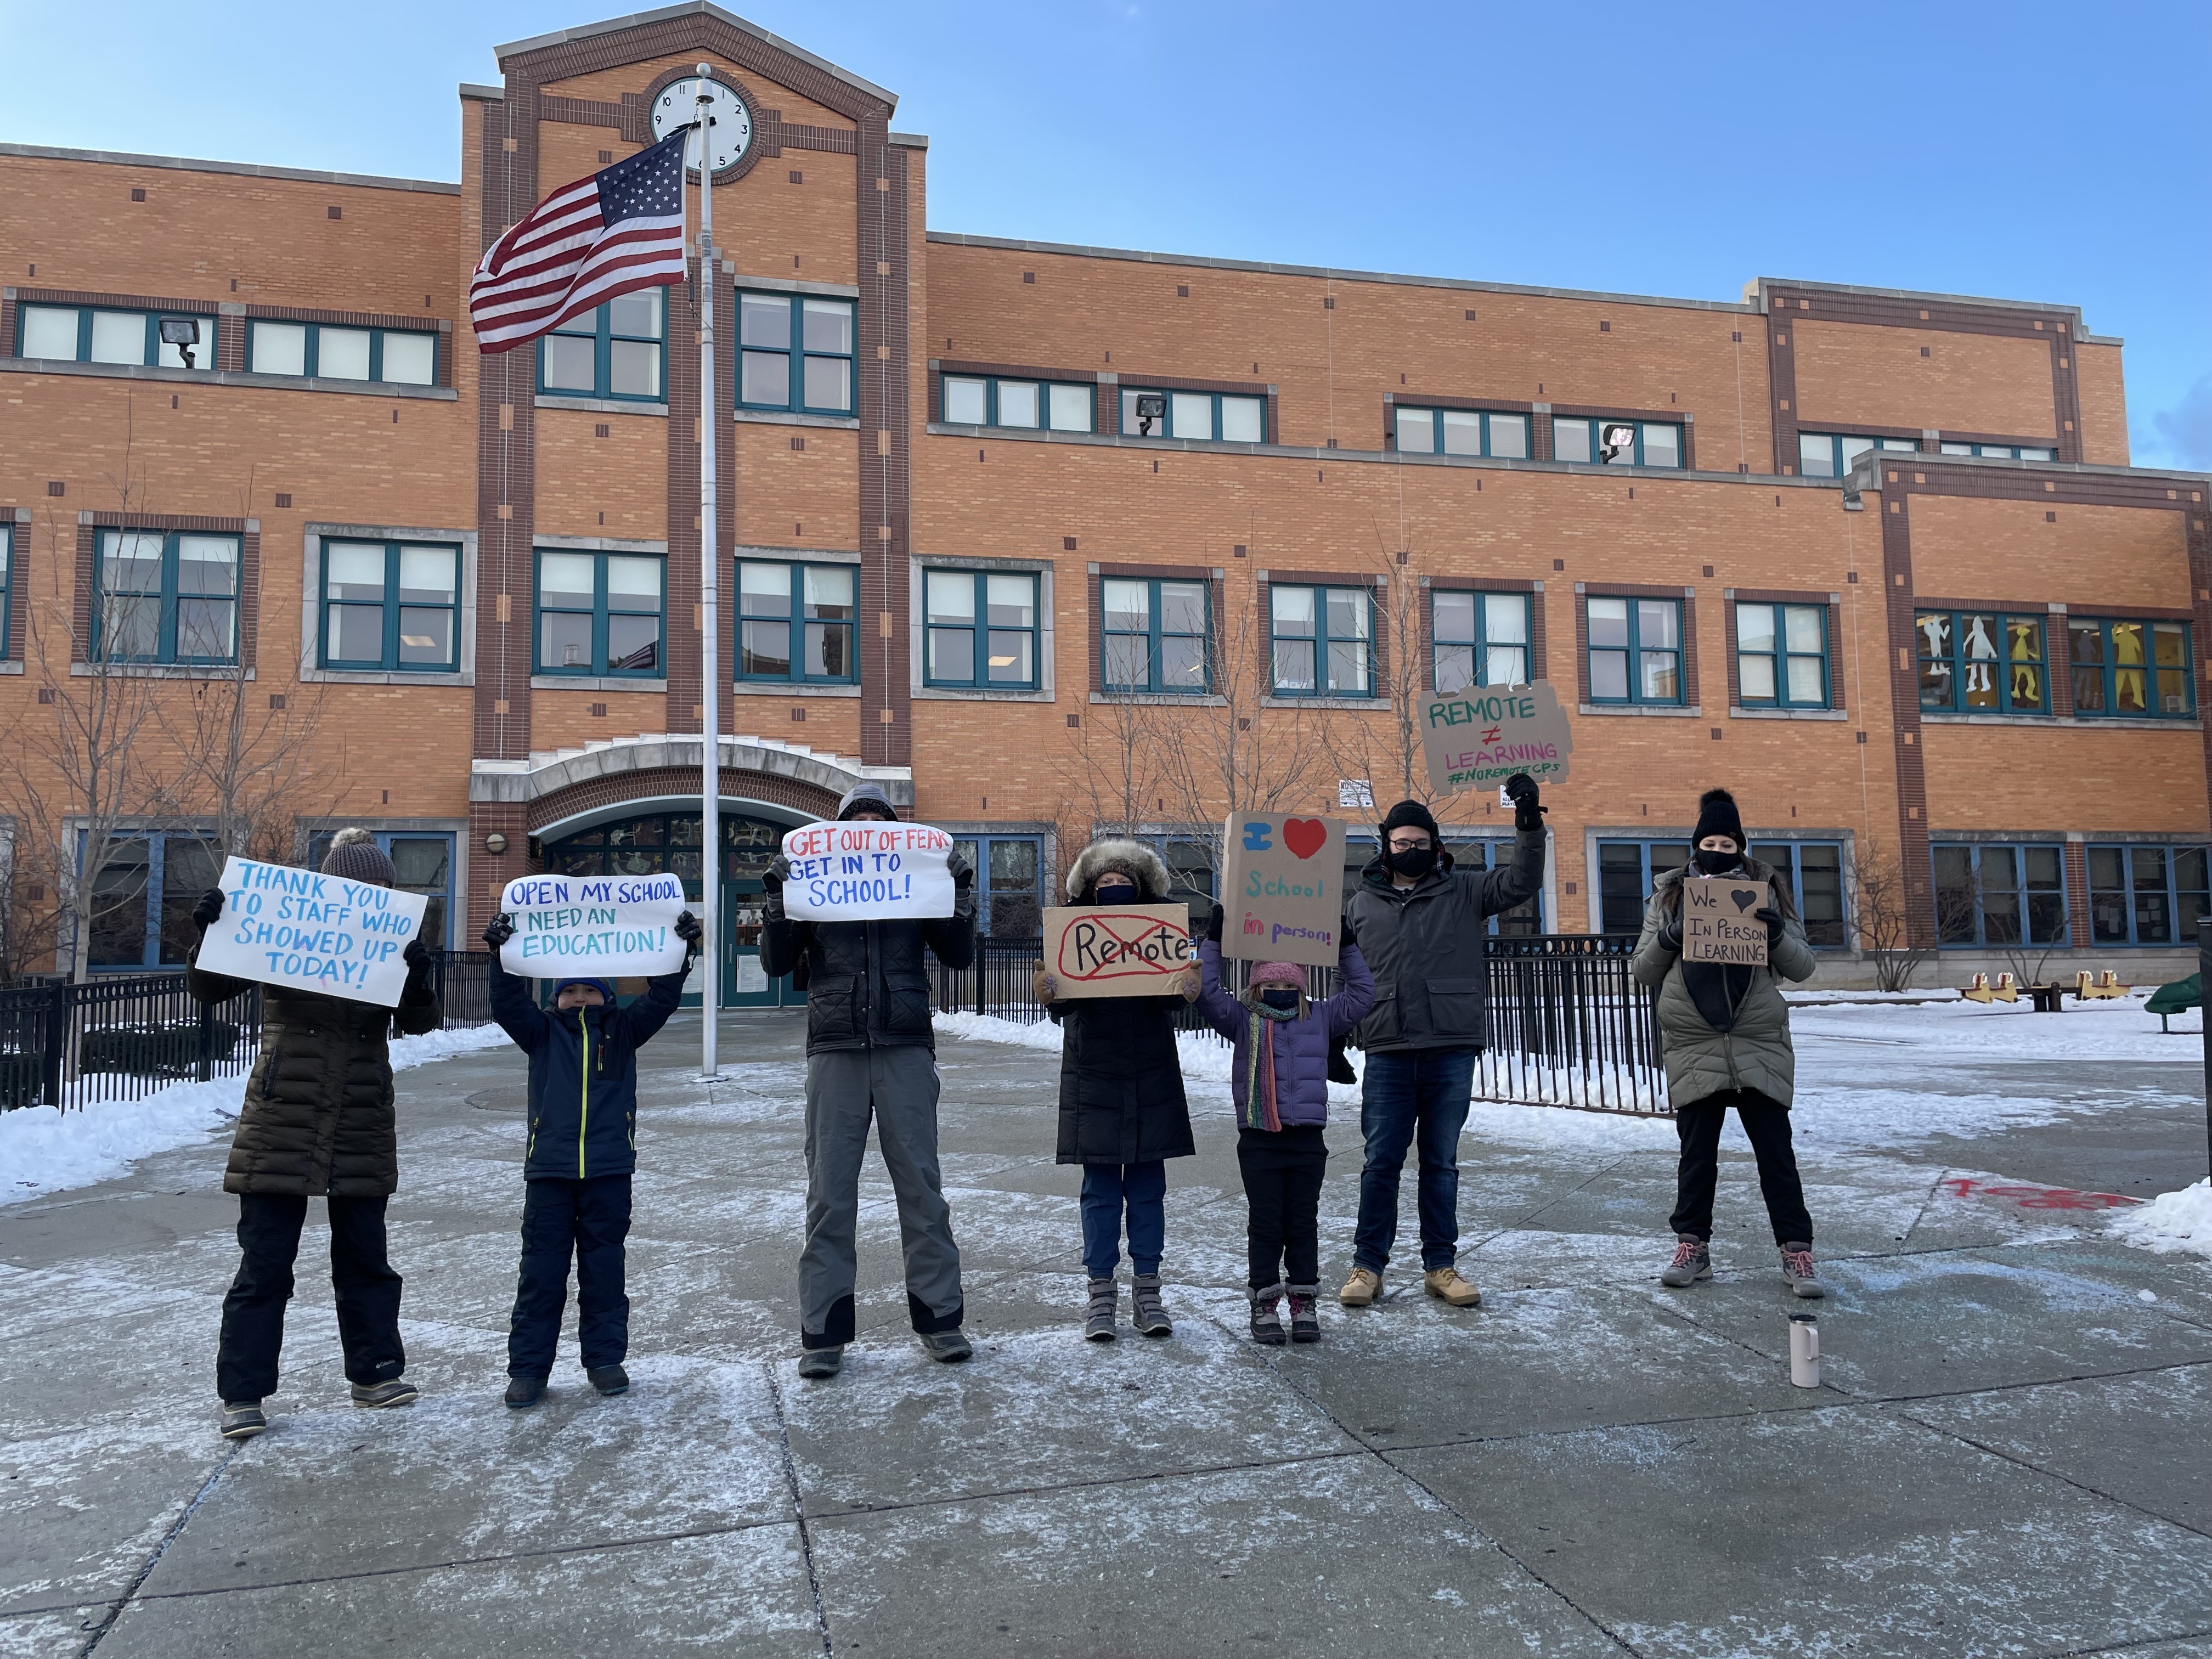 People dressed in winter coats hold signs in front of a school building in Chicago.